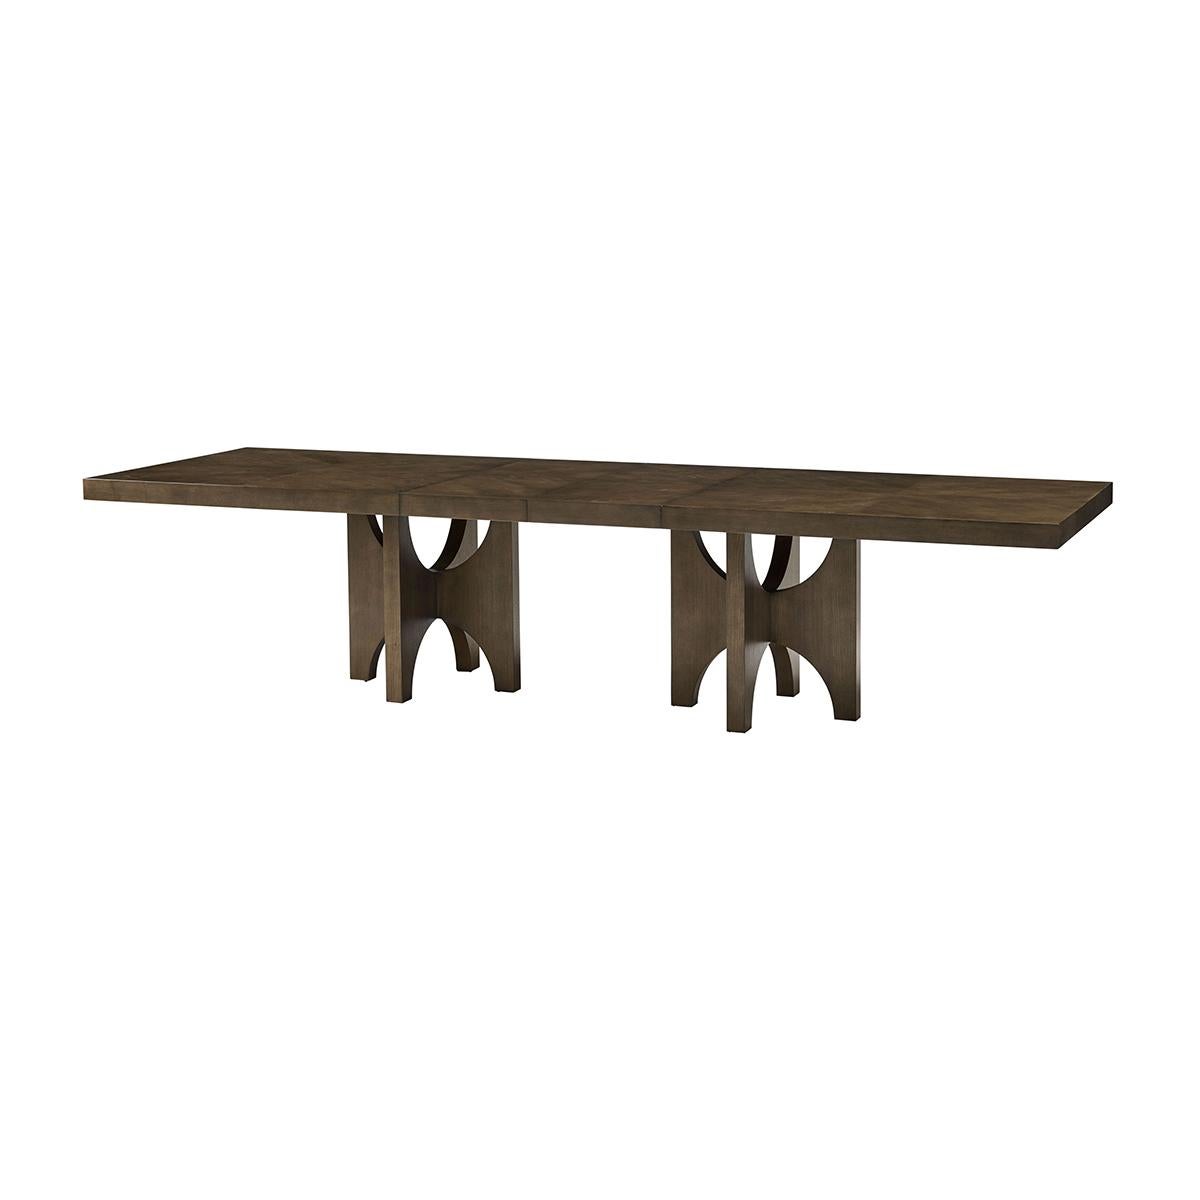 
Modern Dark Ash Dining Table, crafted from premium-figured cathedral ash in the Earth finish, this dining table boasts a rich texture and a sleek, light finish that adds a touch of elegance to any dining room. 

Extending from 97